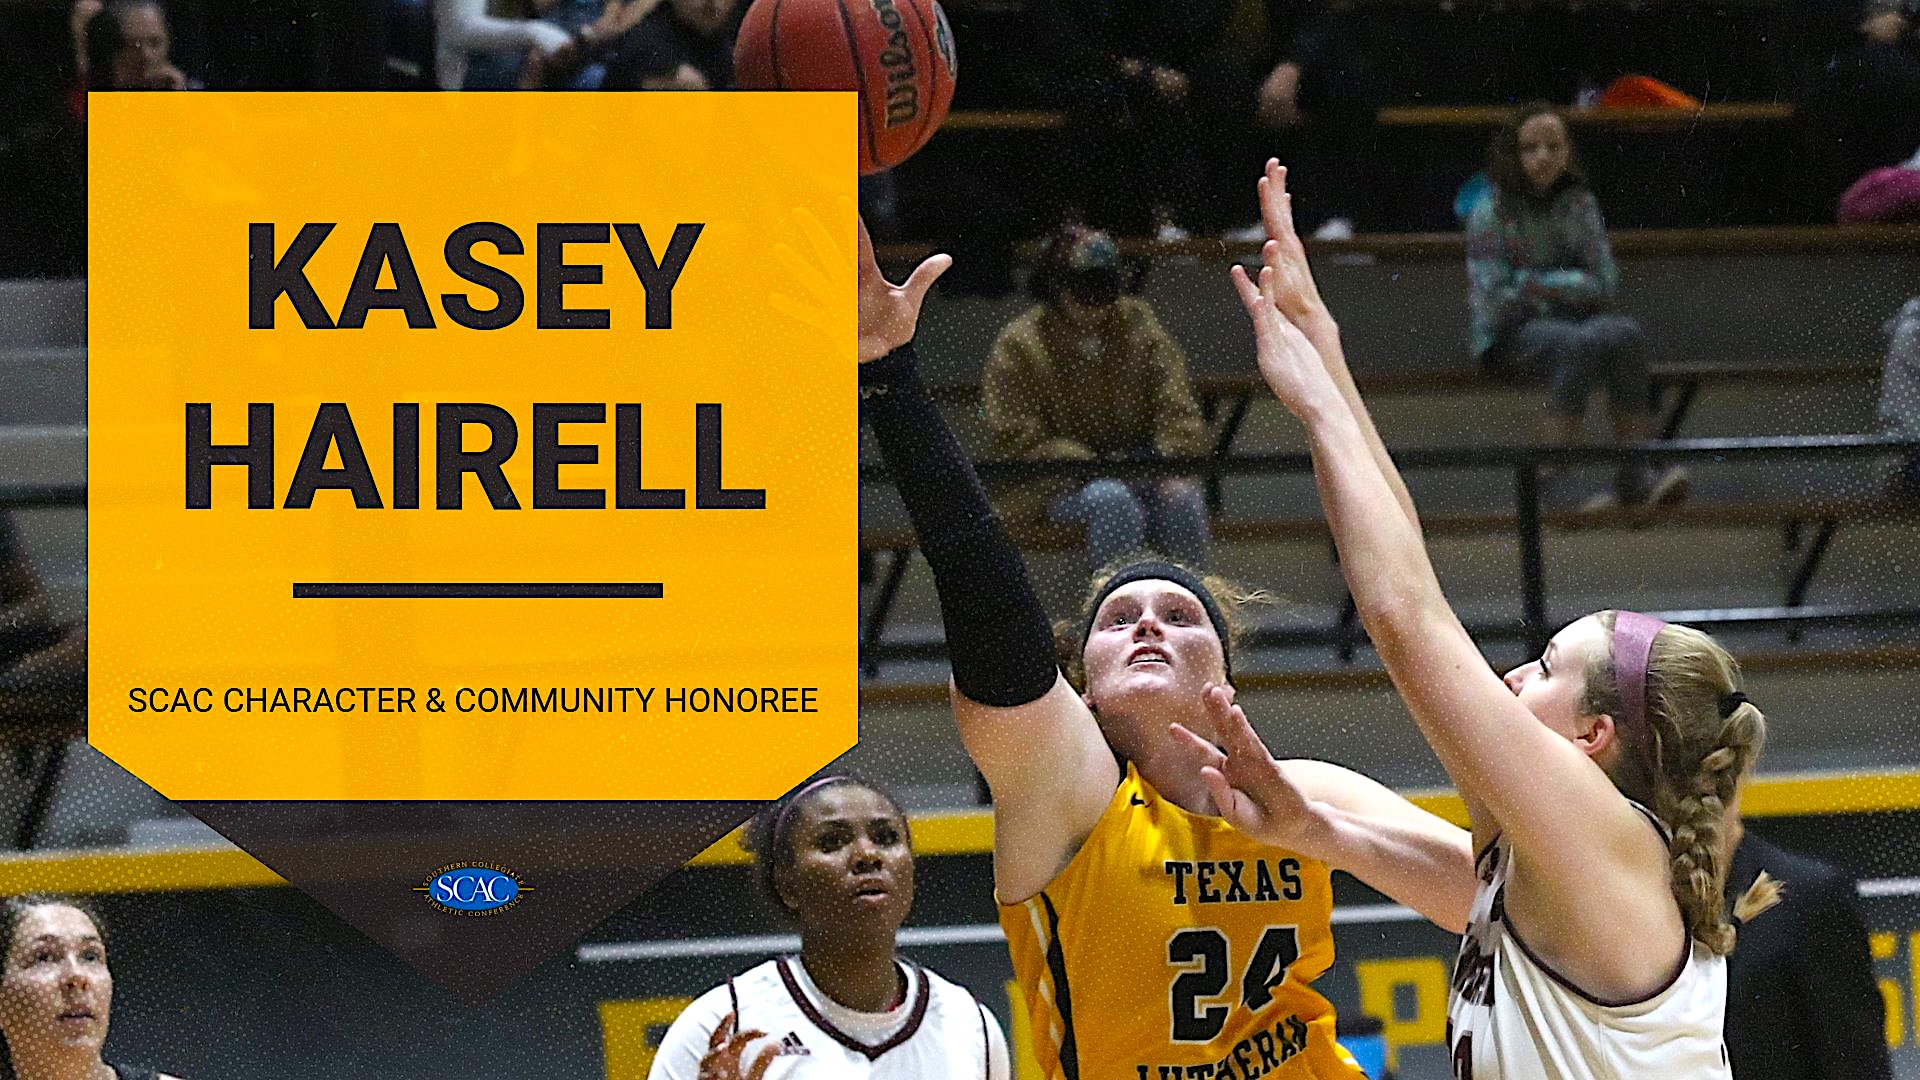 TLU's Kasey Hairell named SCAC Female Character & Community Student-Athlete of the Week